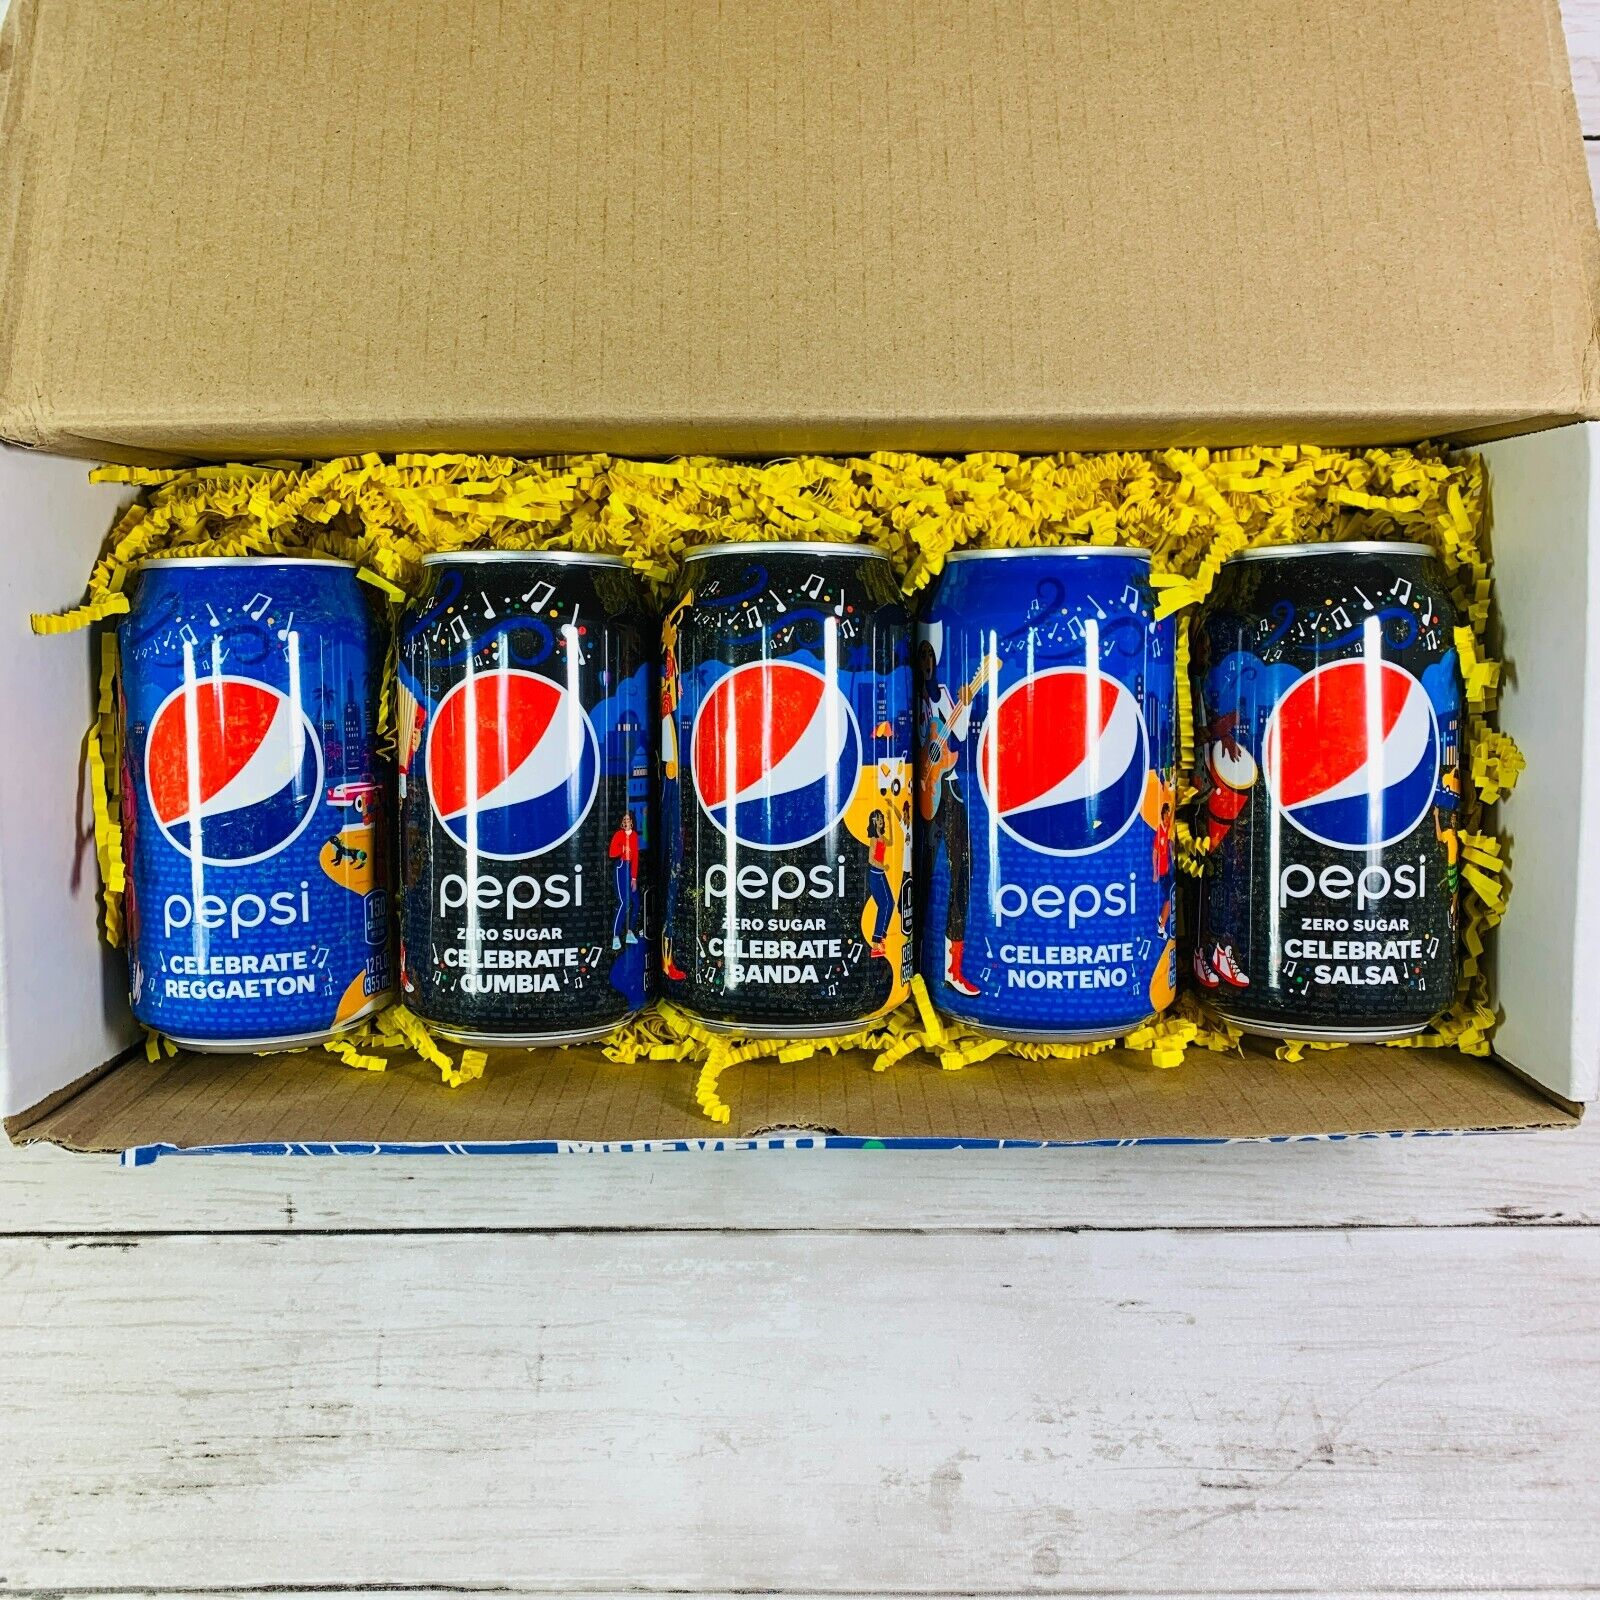 Pepsi Muevelo Con Pepsi Limited Edition 5 Cans Metaverse Dance Class